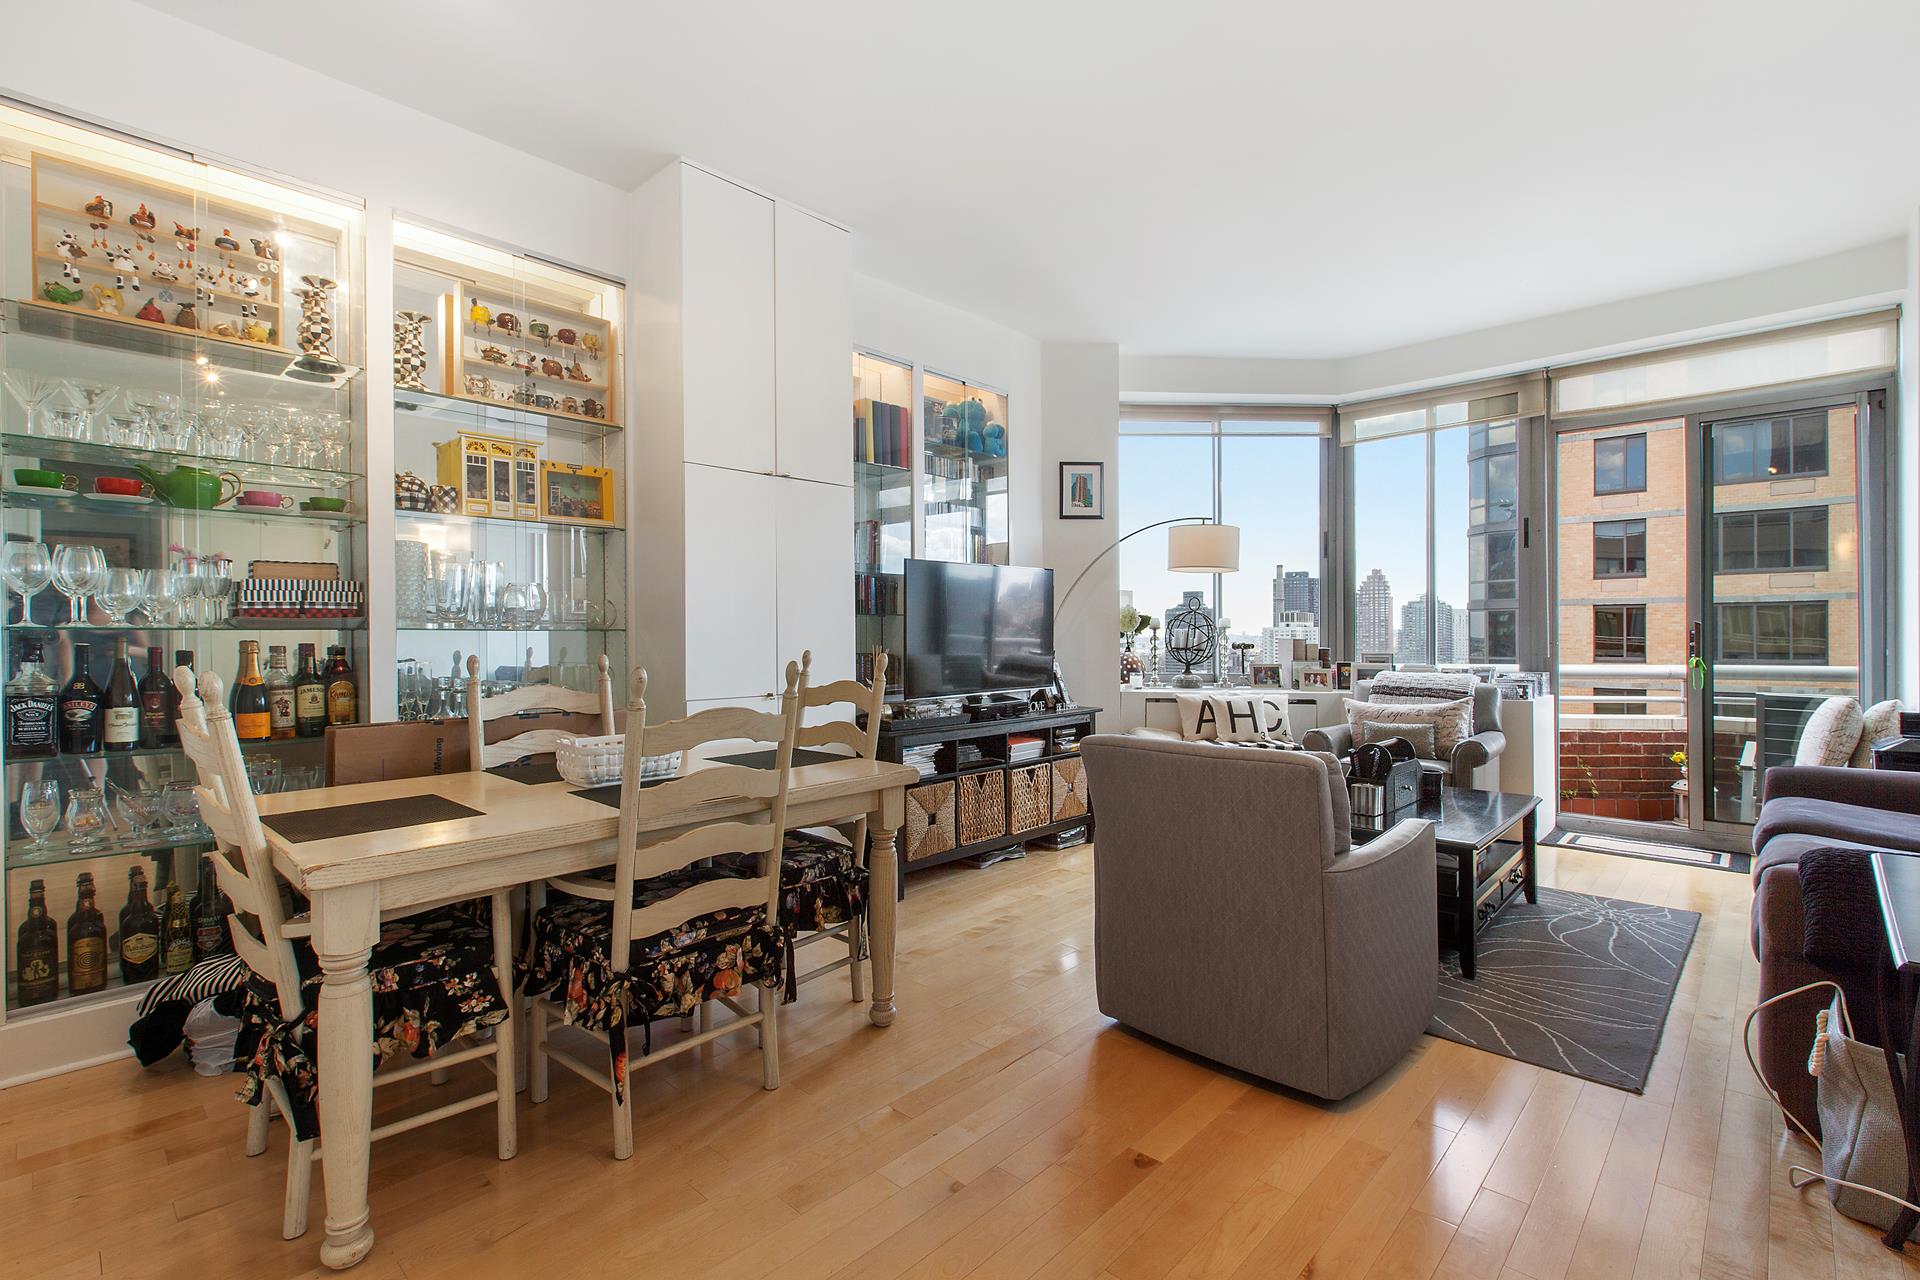 401 East 84th Street Phb, Yorkville, Upper East Side, NYC - 1 Bedrooms  
1.5 Bathrooms  
4 Rooms - 